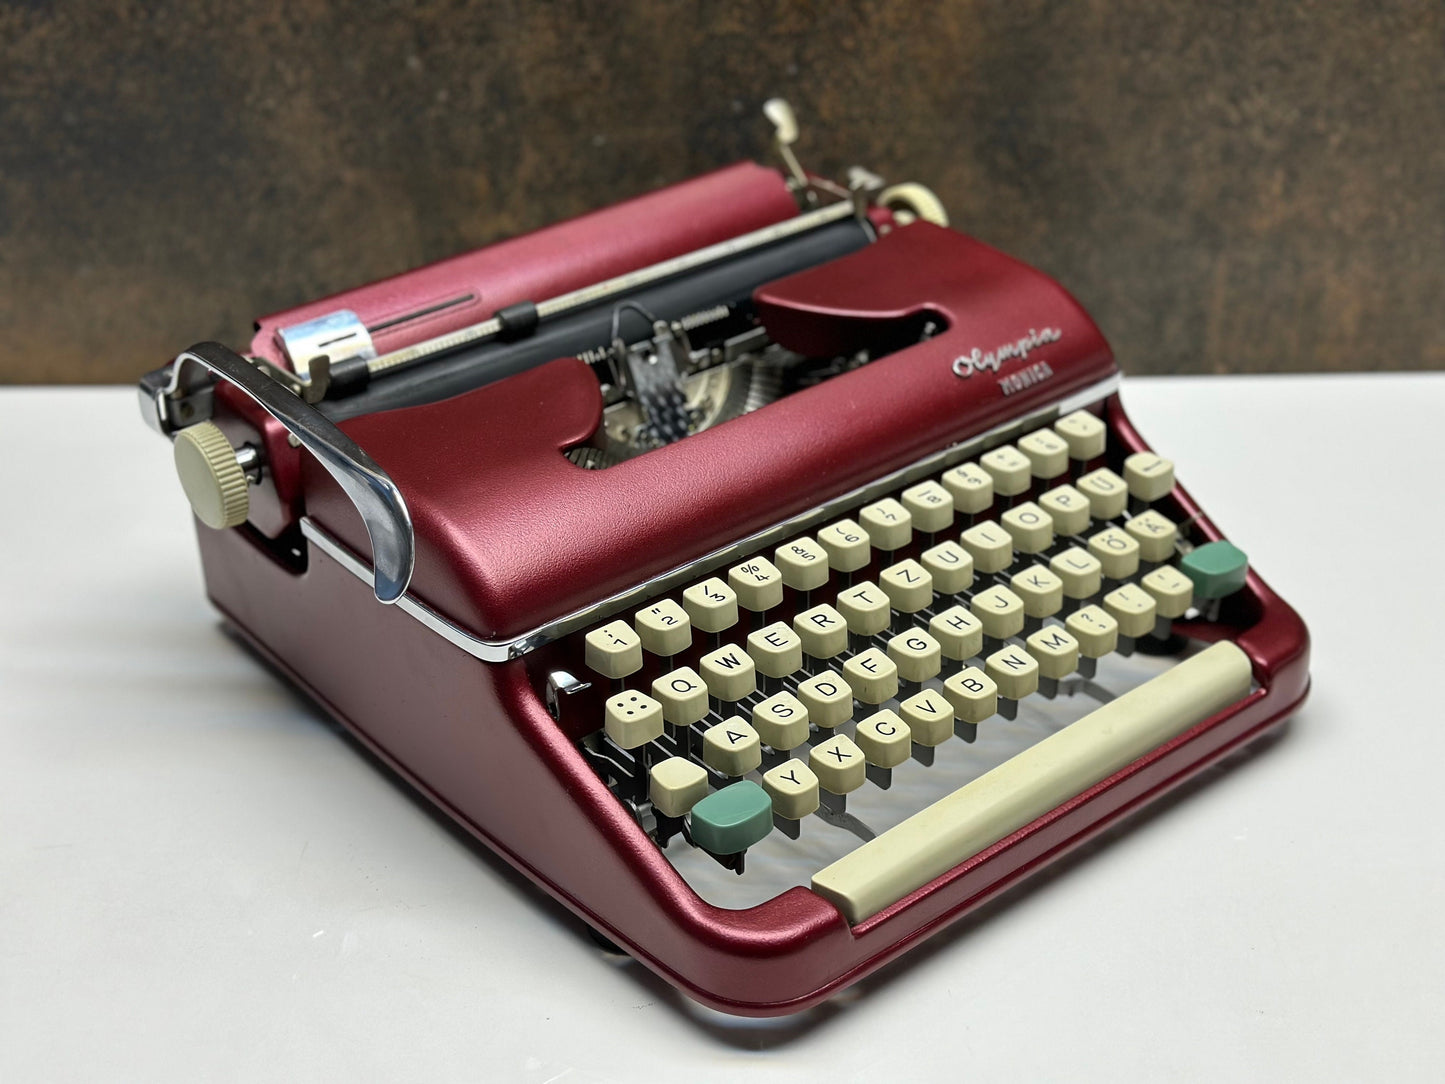 Vintage Olympia SM4 Claret Red Typewriter - Special Typewriter,Working and Fully Restored,Ideal for Writers and Collectors-Michelle Riger